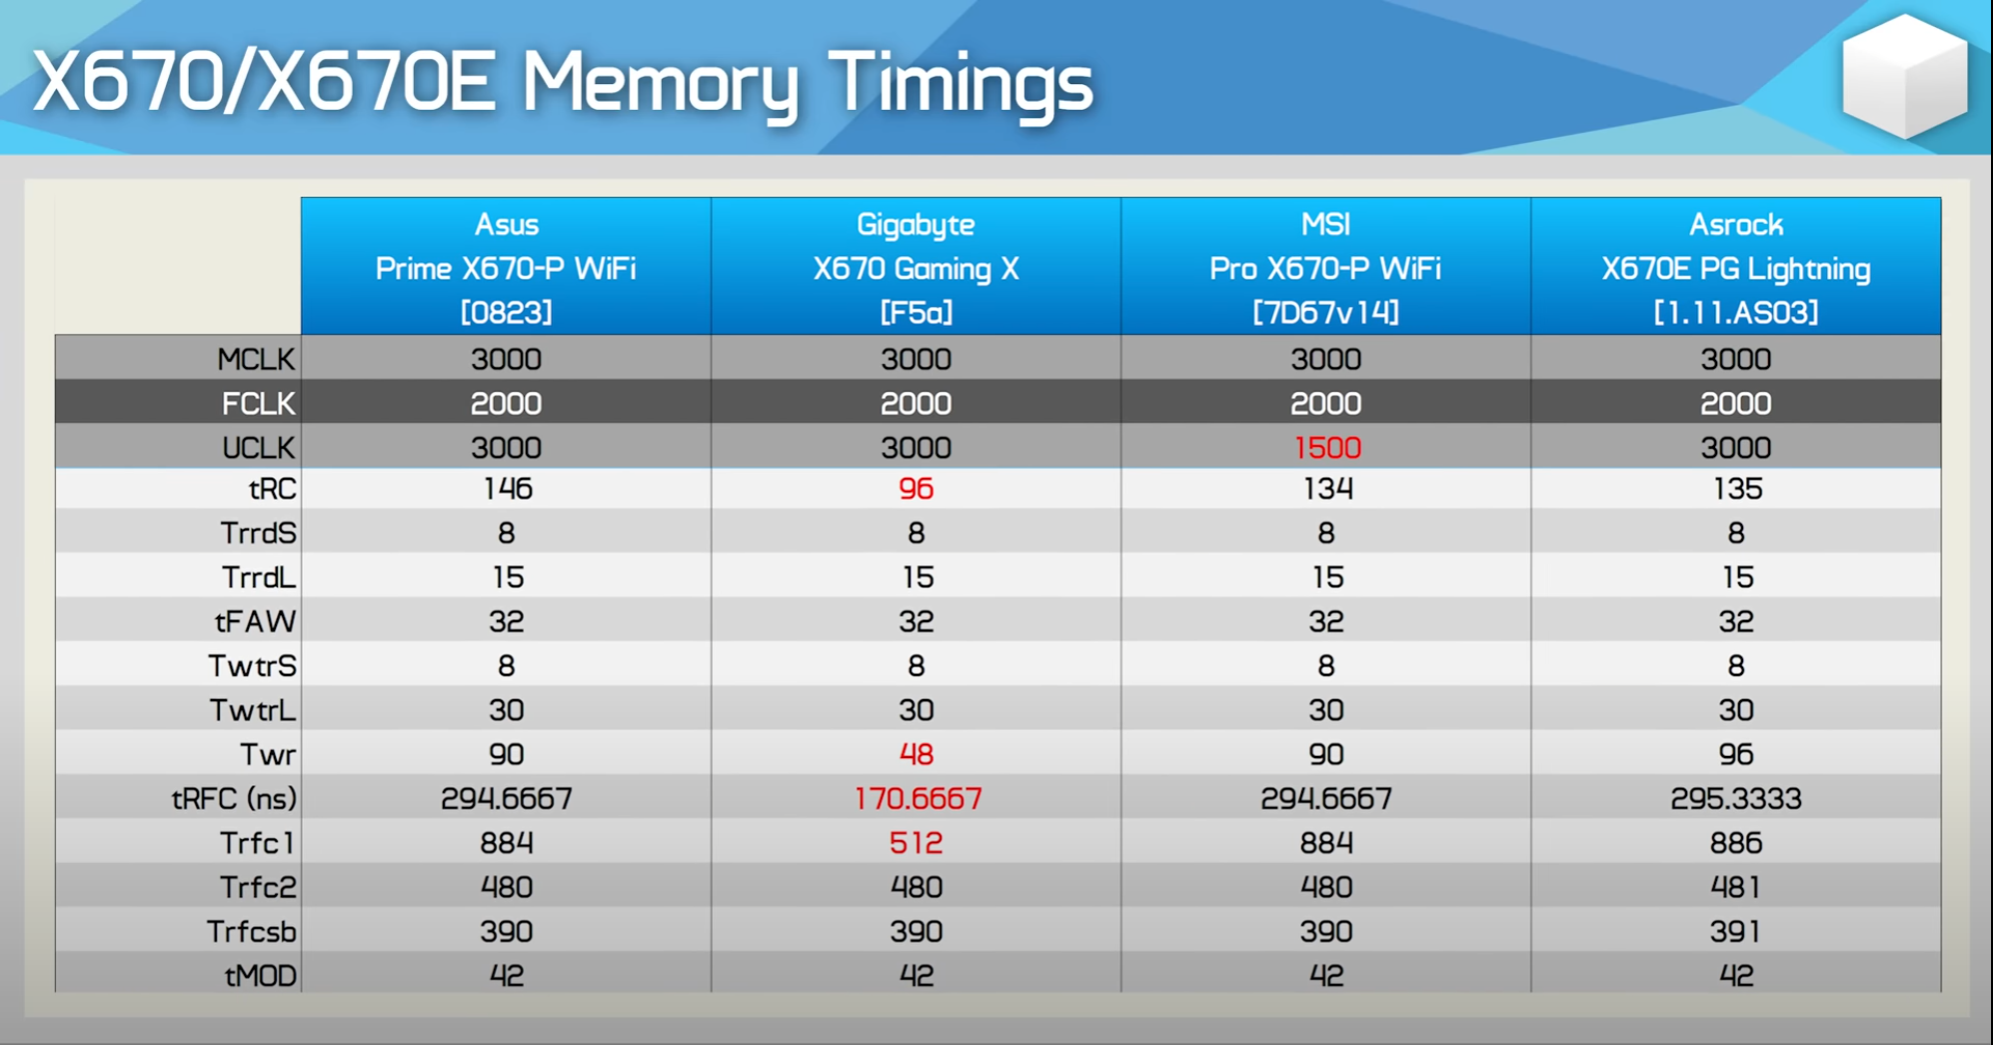 X670/X670E Memory Timings - More Motherboards